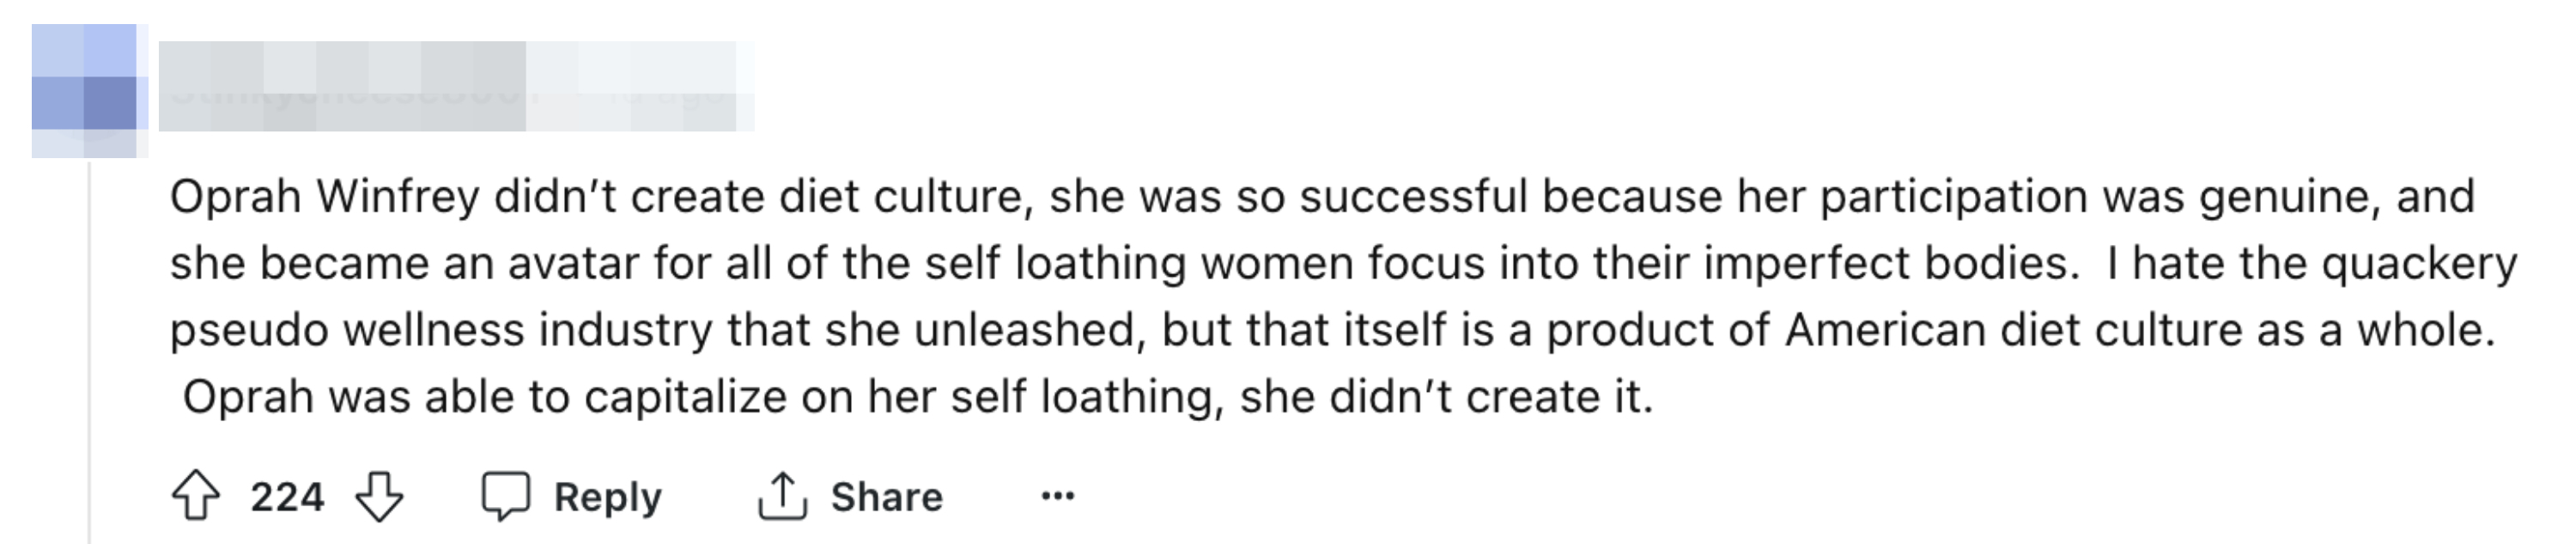 Text from an online comment discussing Oprah Winfrey&#x27;s influence on self-image and diet culture